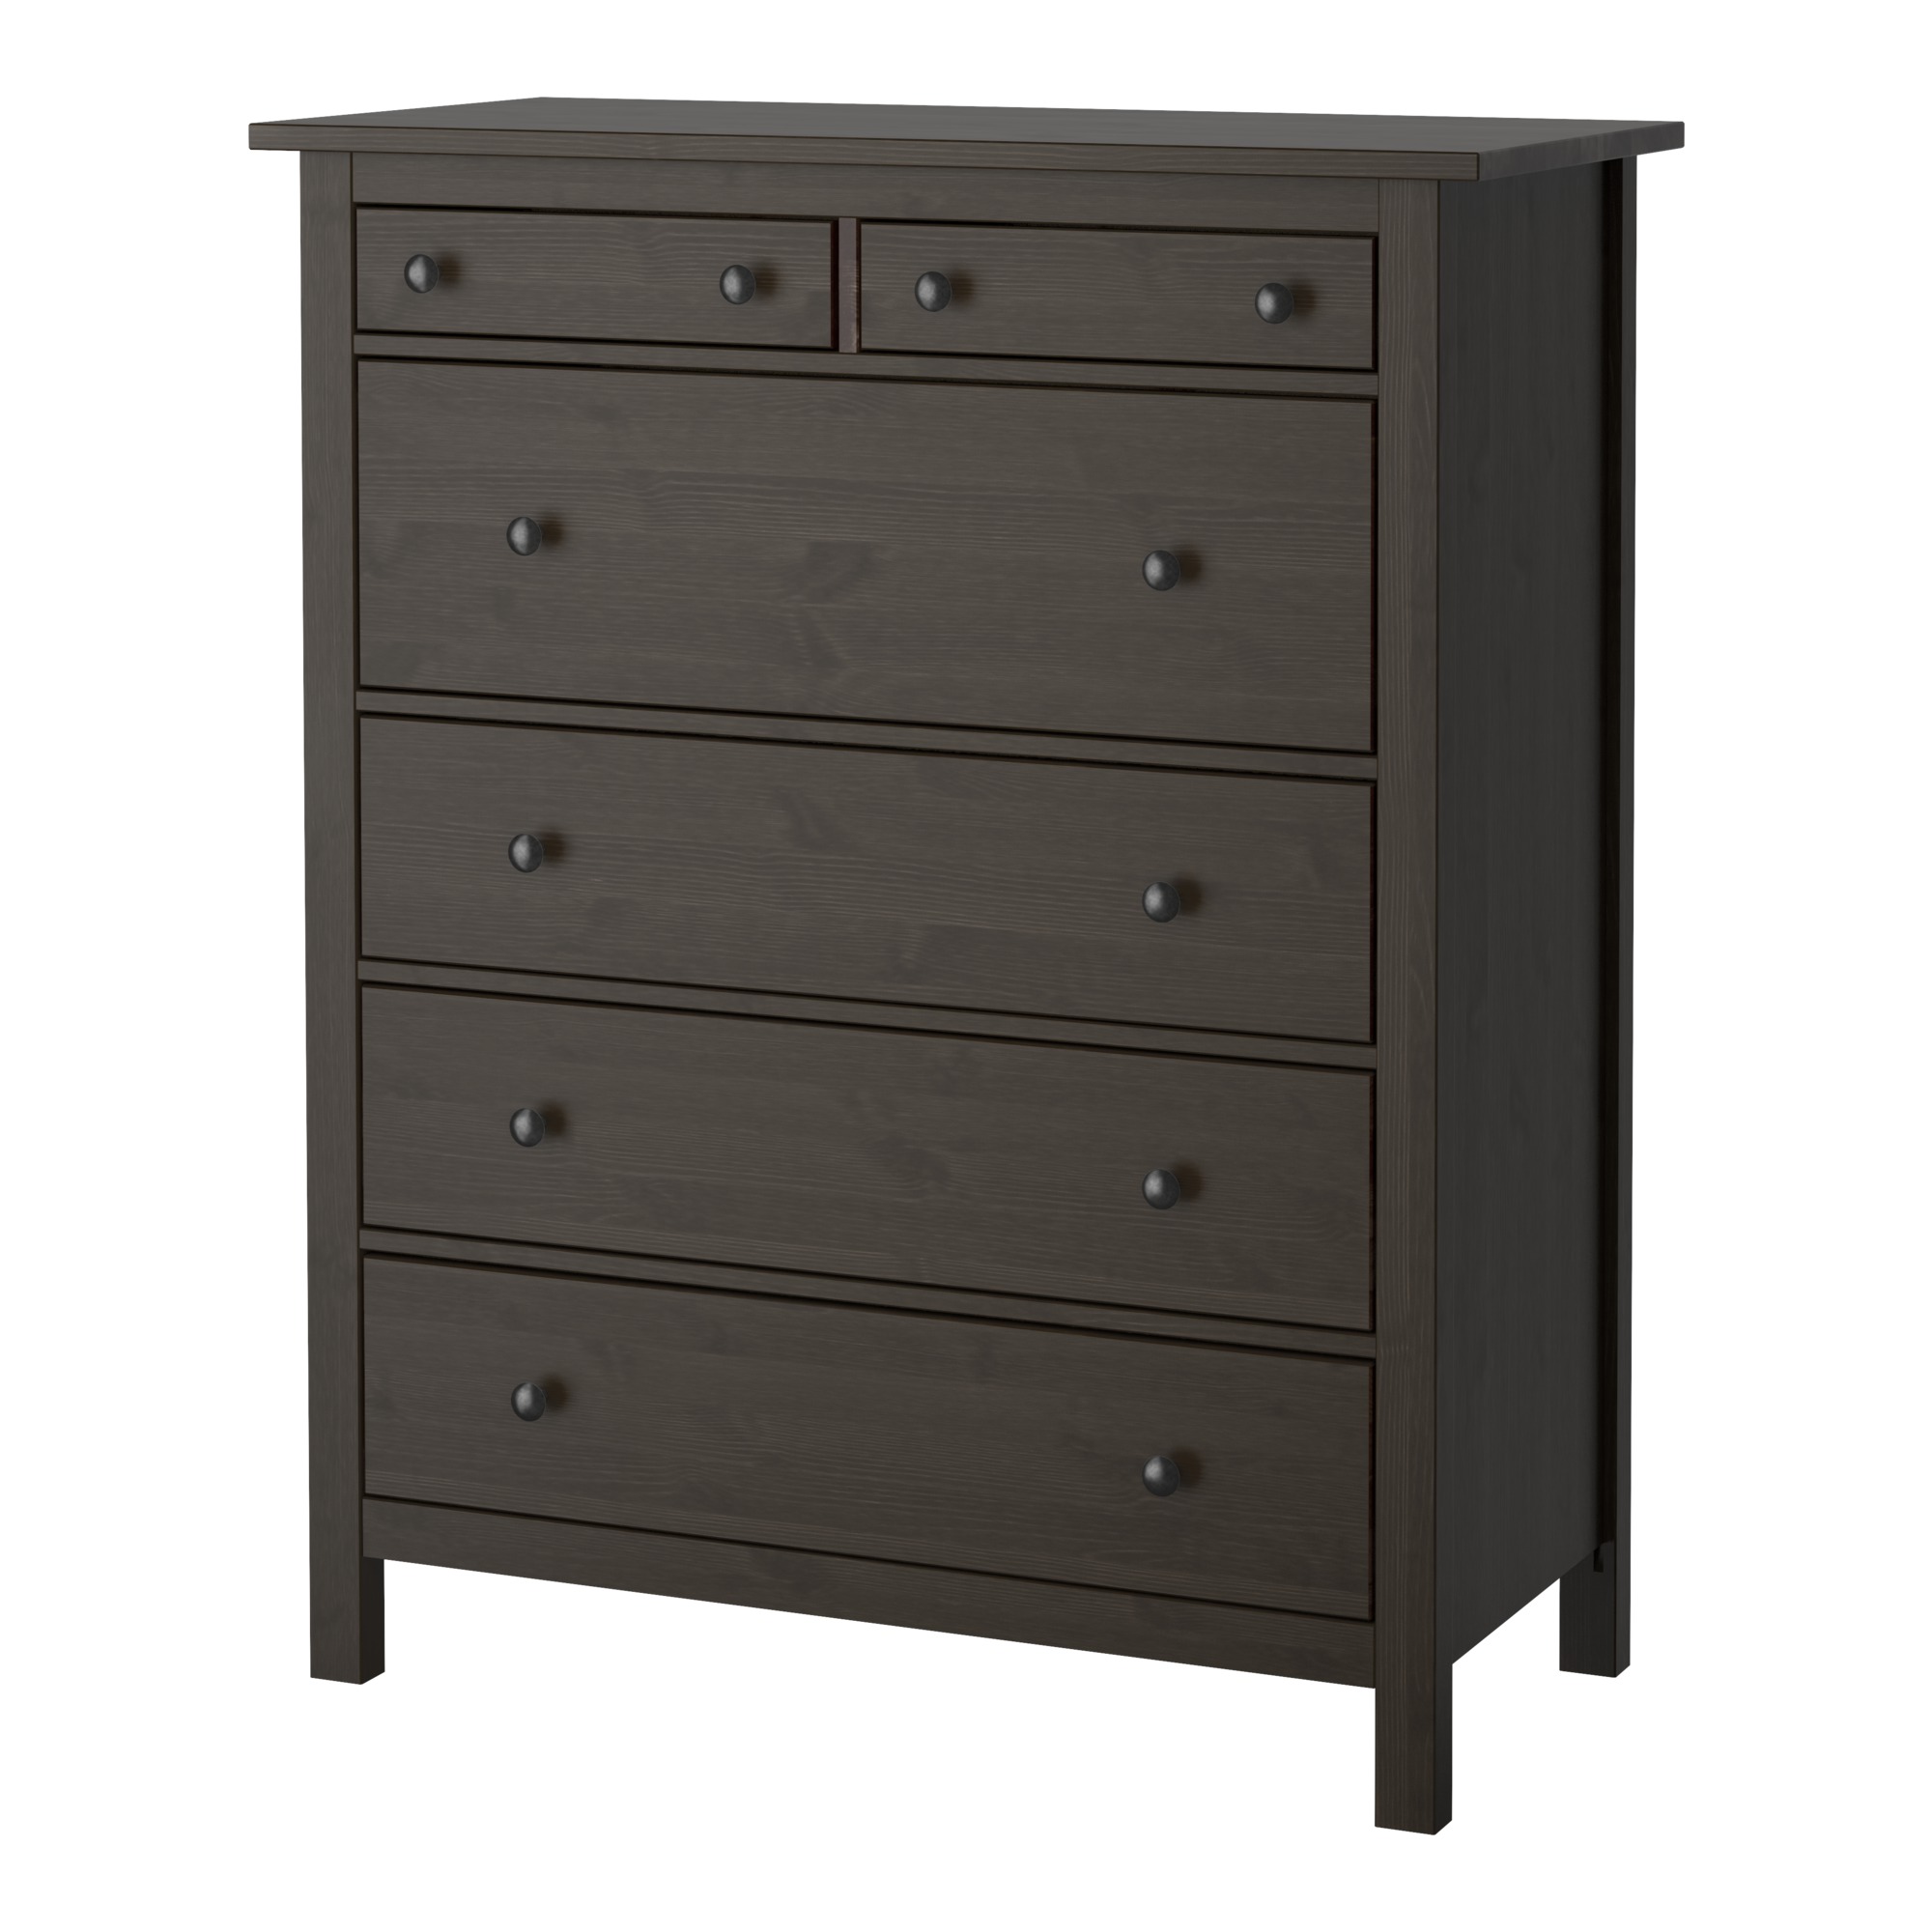 chest of drawers hemnes 6-drawer chest - black-brown - ikea PWIHQCR